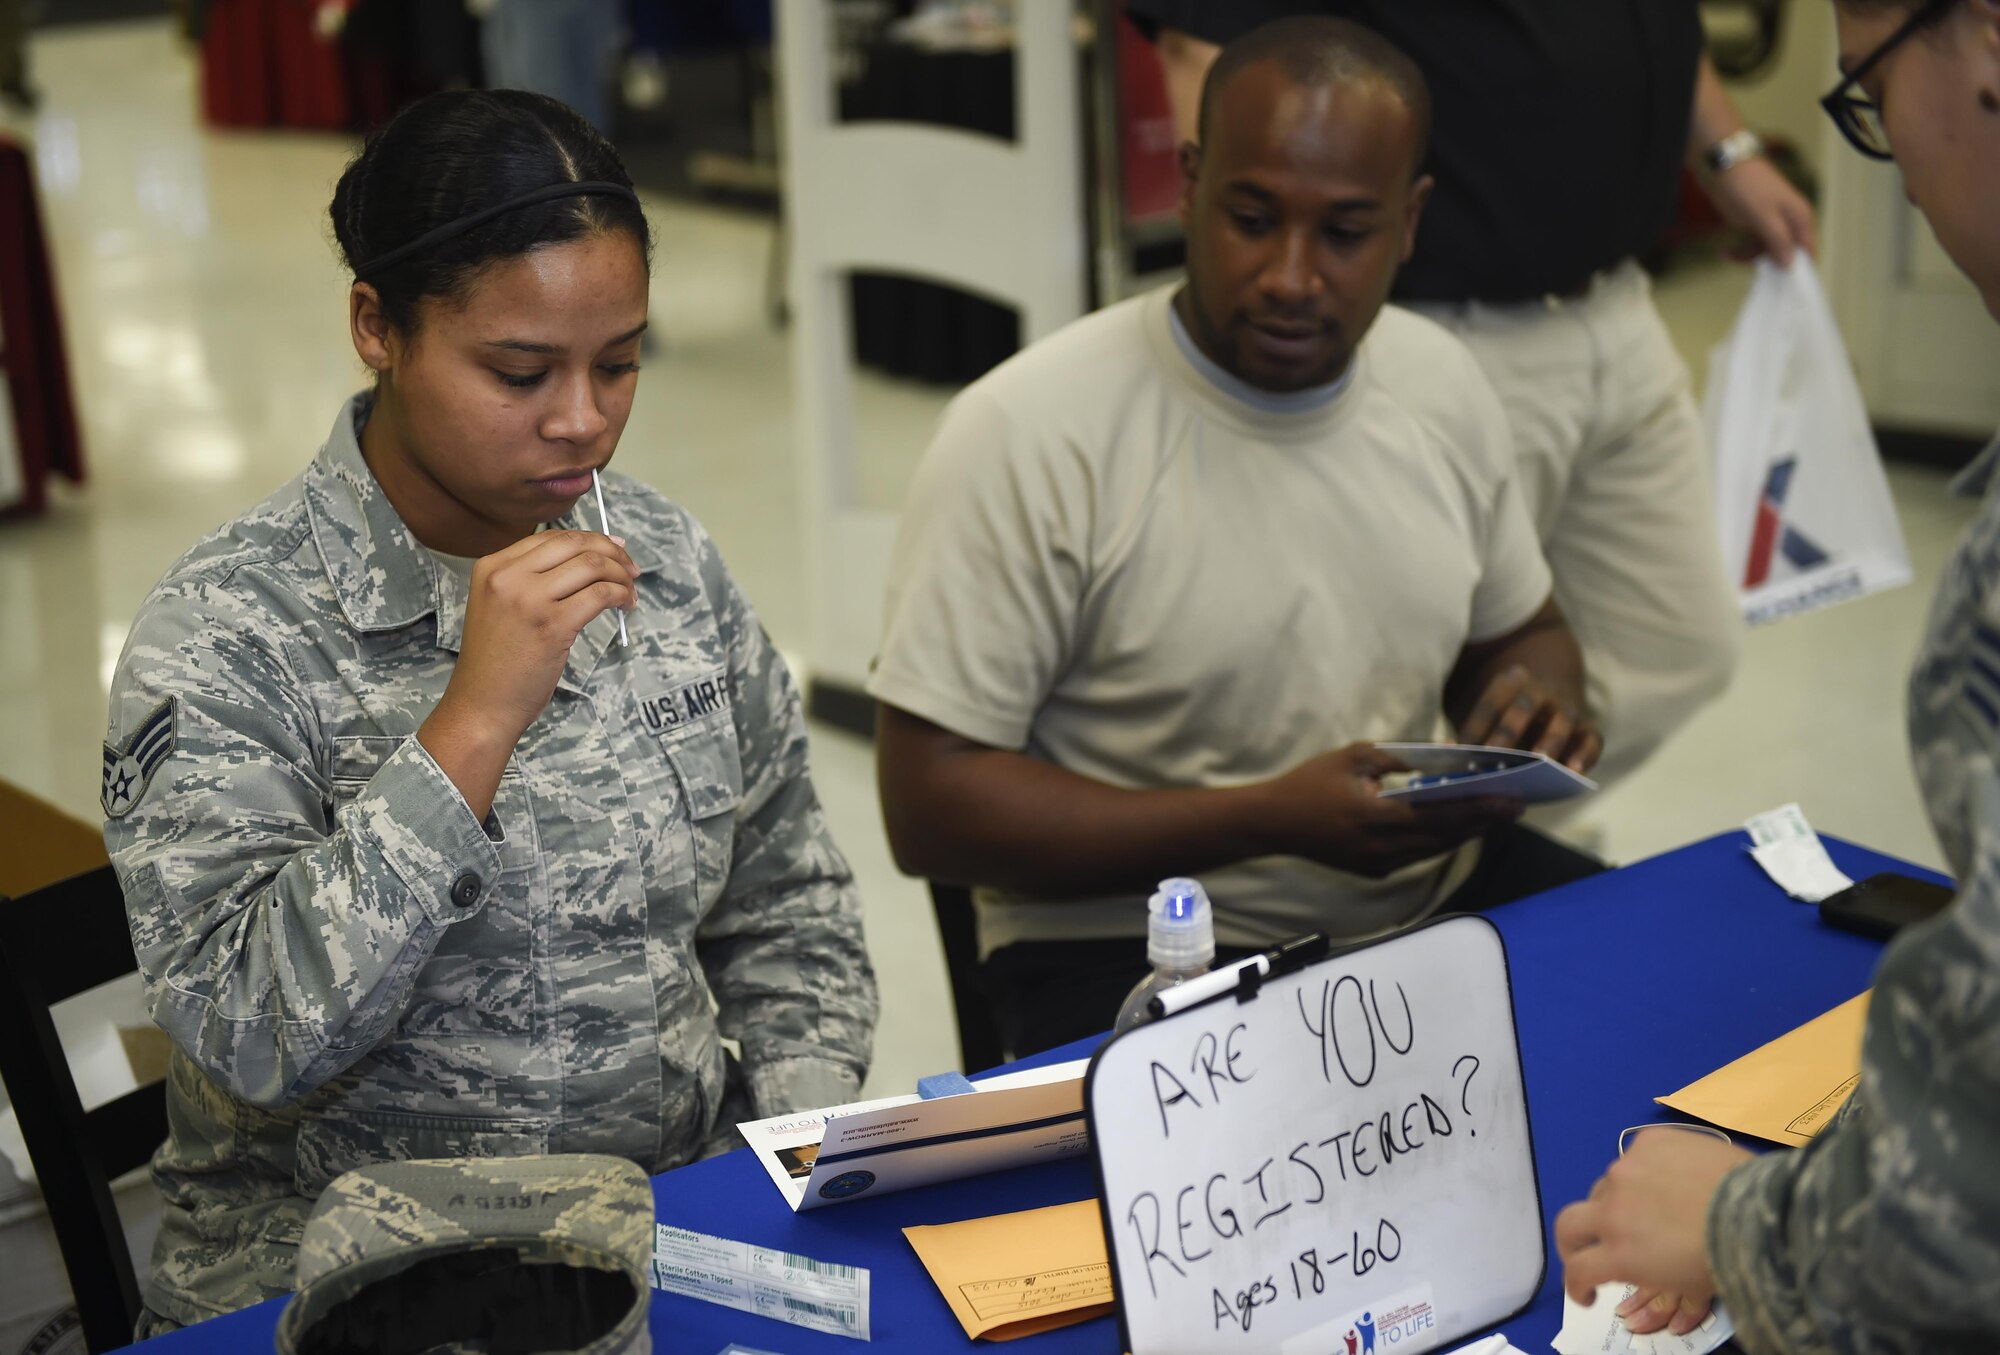 Senior Airman Gabreanna Reed, a cyber surety craftsman with the 1st Special Operations Wing Communications Squadron, and Staff Sgt. Joshua Foreman, an aircrew flight equipment technician with the Special Tactics Training Squadron, provide mouth swabs as potential bone marrow donors at Hurlburt Field, Fla., Nov. 17, 2015. The DNA from the mouth swabs collected from Department of Defense members will be added to the National Marrow Donor program records. (U.S. Air Force photo by Airman Kai White)